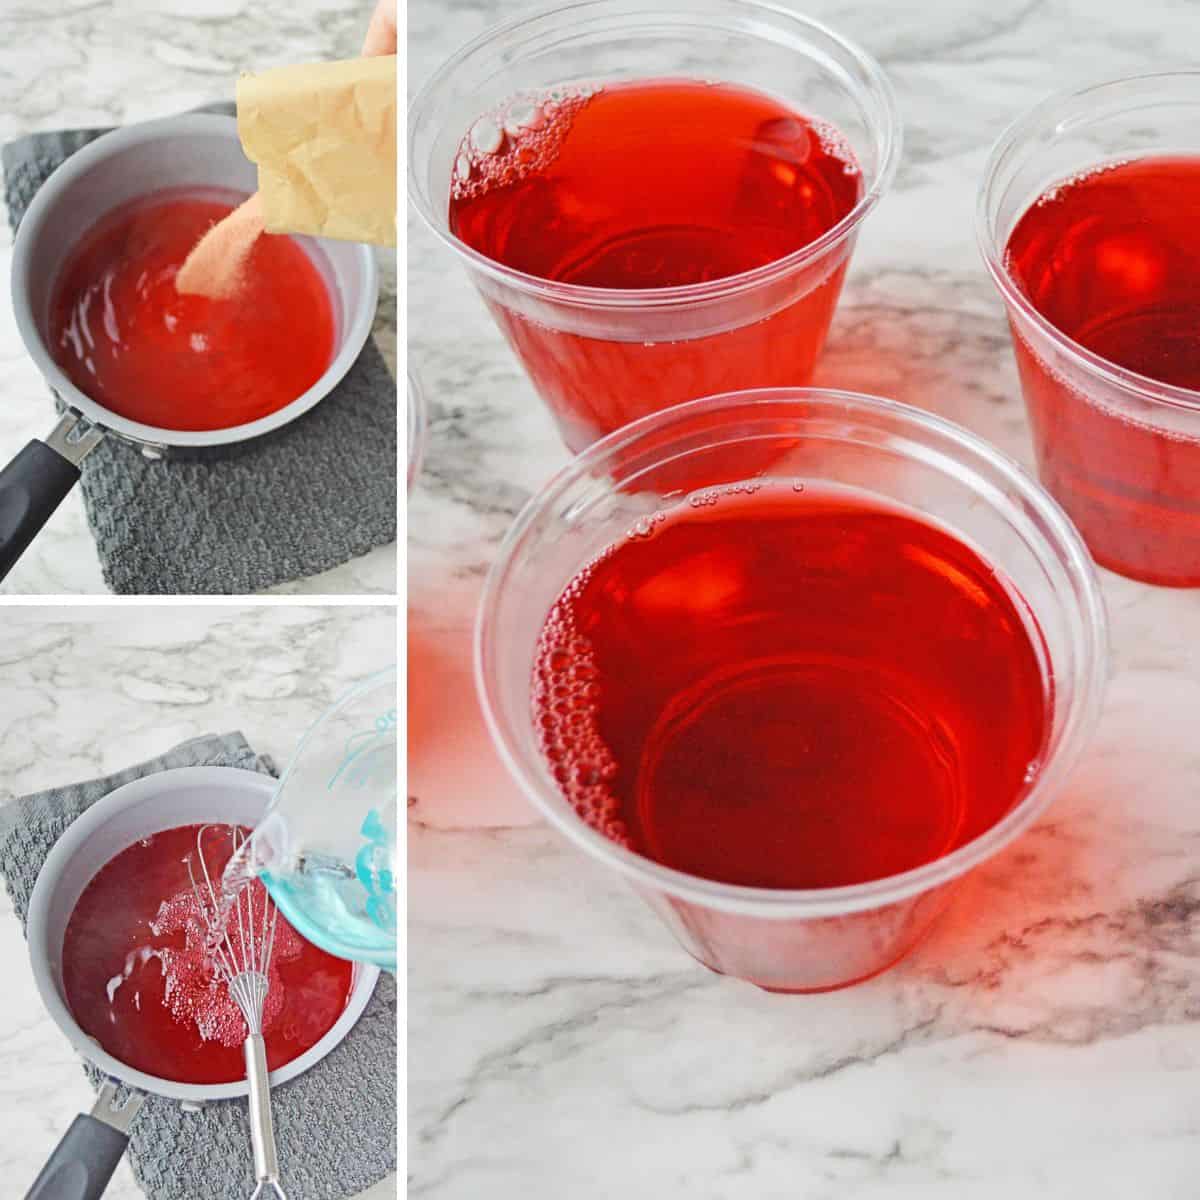 Three image collage of pot of water with jello mix being added, pot with water being added, and jello mix poured into clear plastic cups.